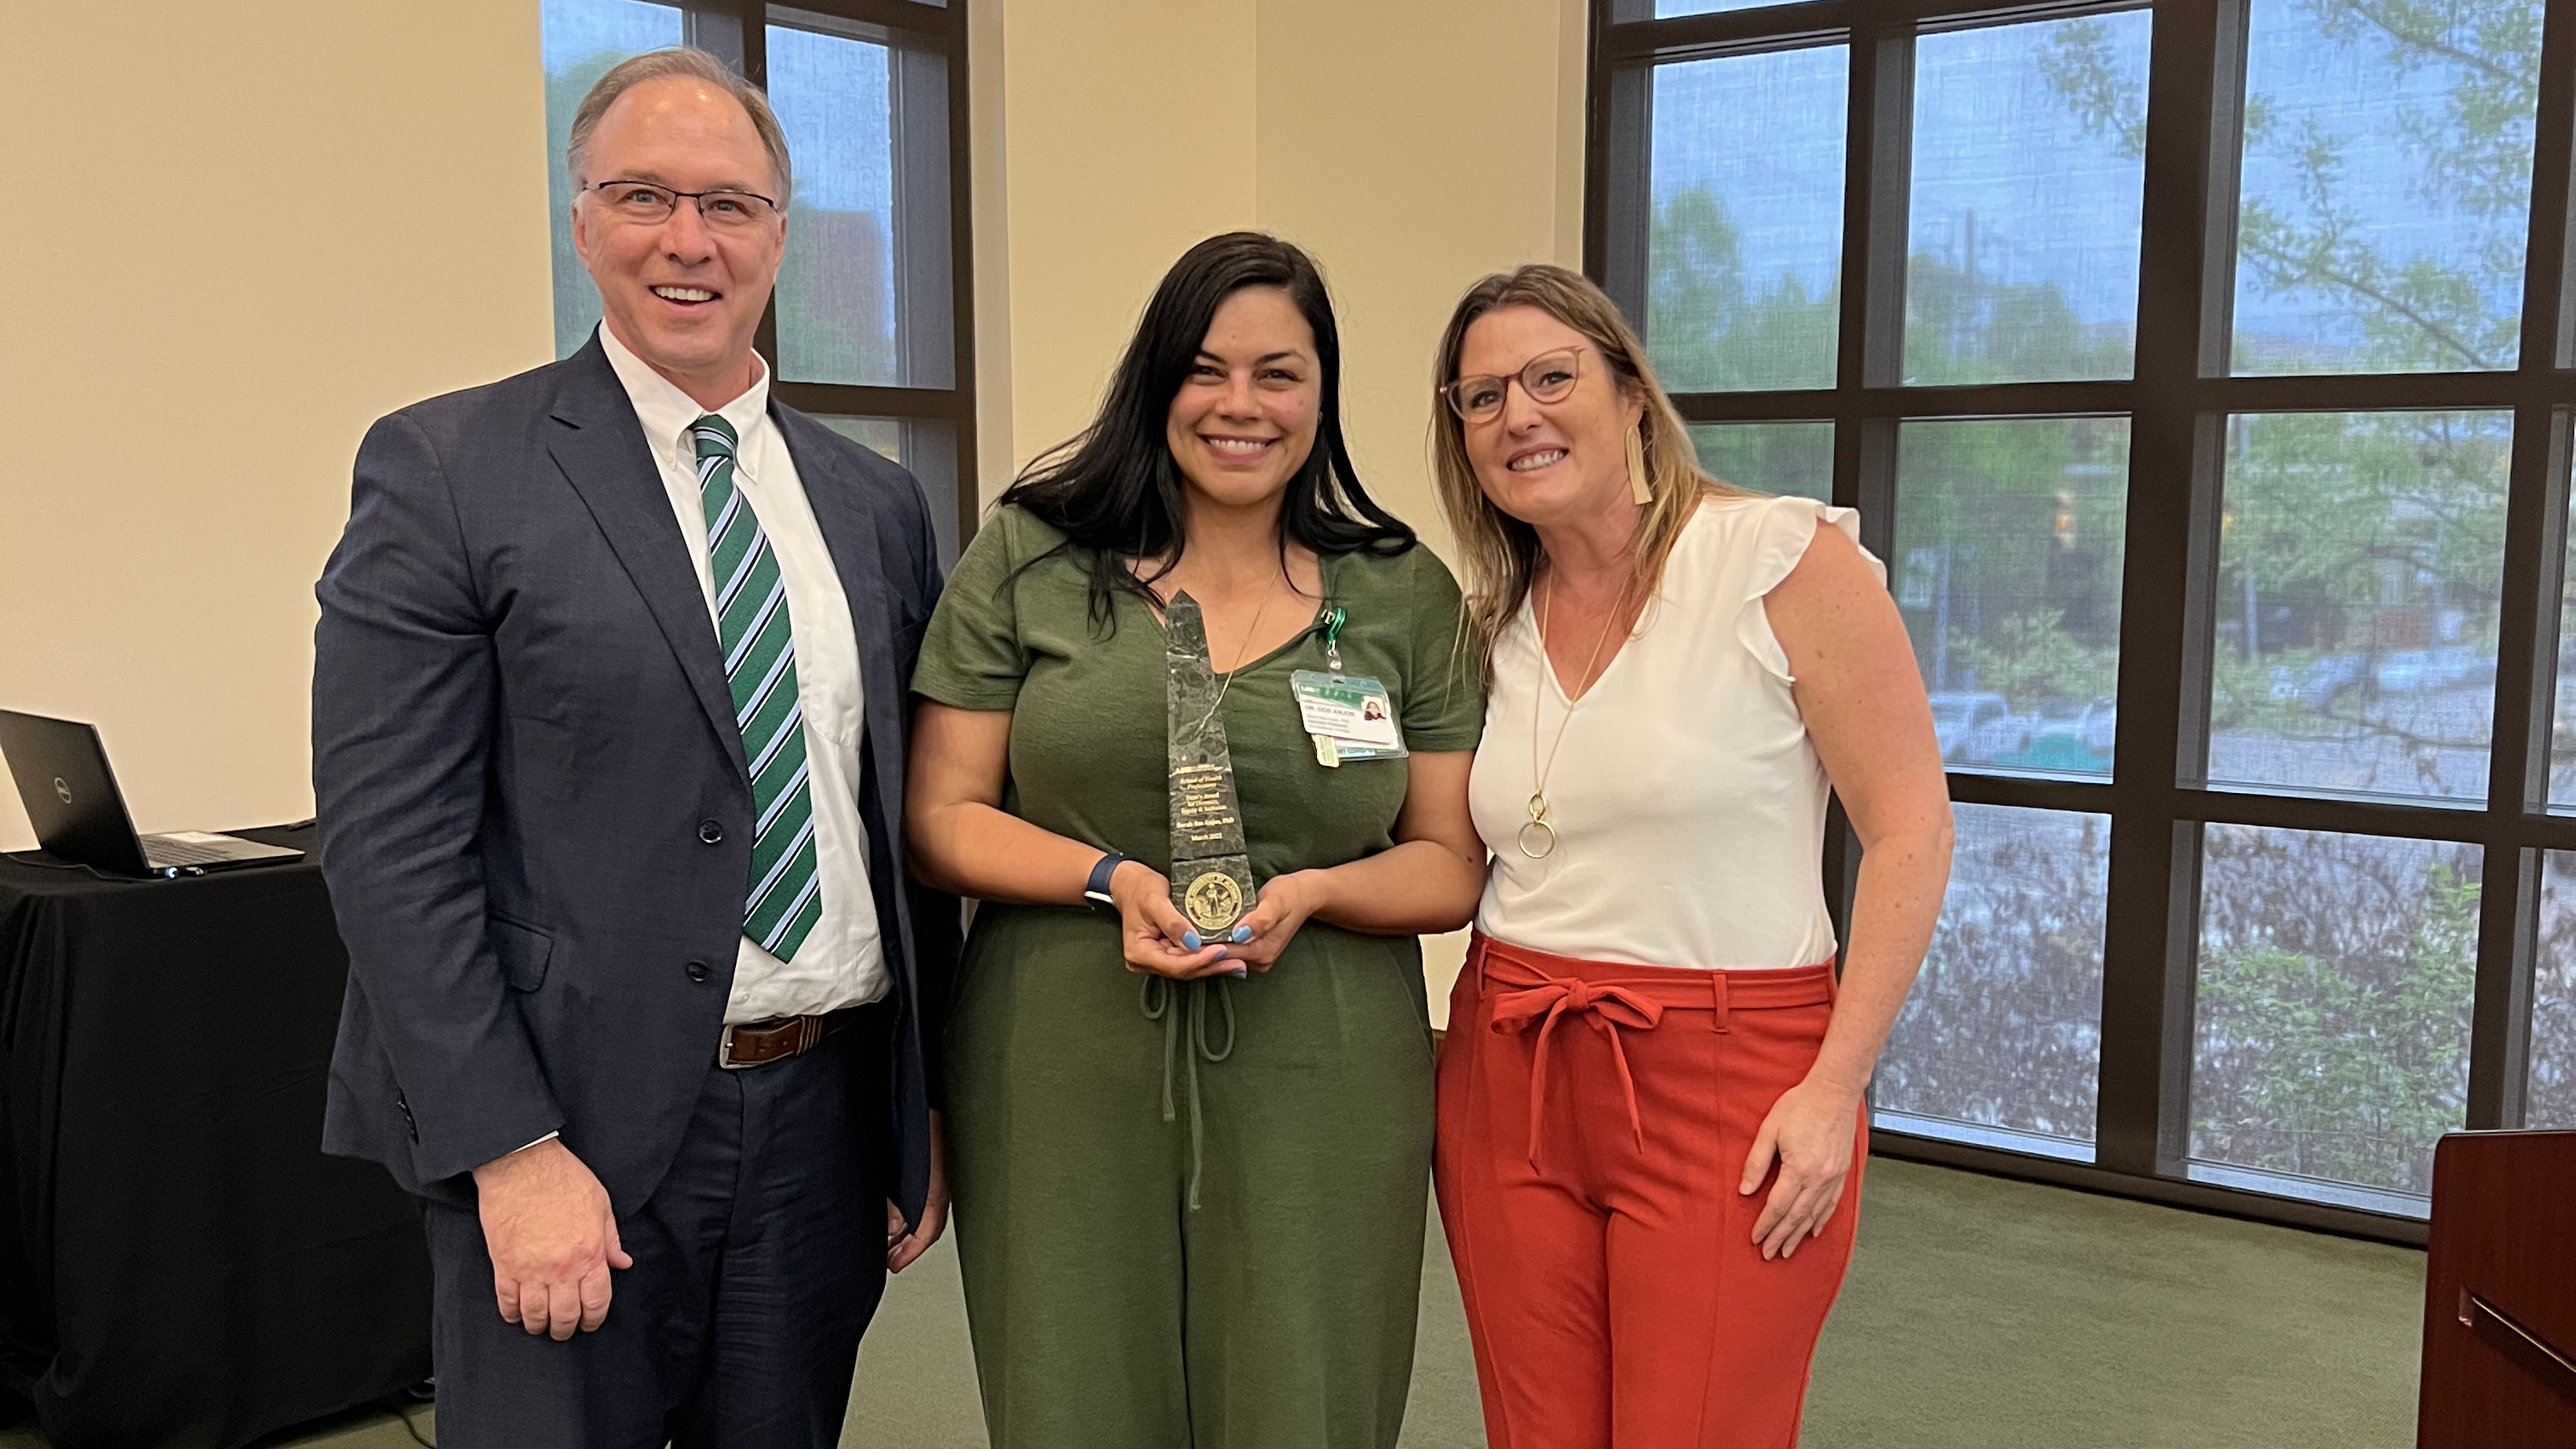 Dean's Award for Diversity, Equity, and Inclusion - Faculty: Sarah dos Anjos, Occupational Therapy